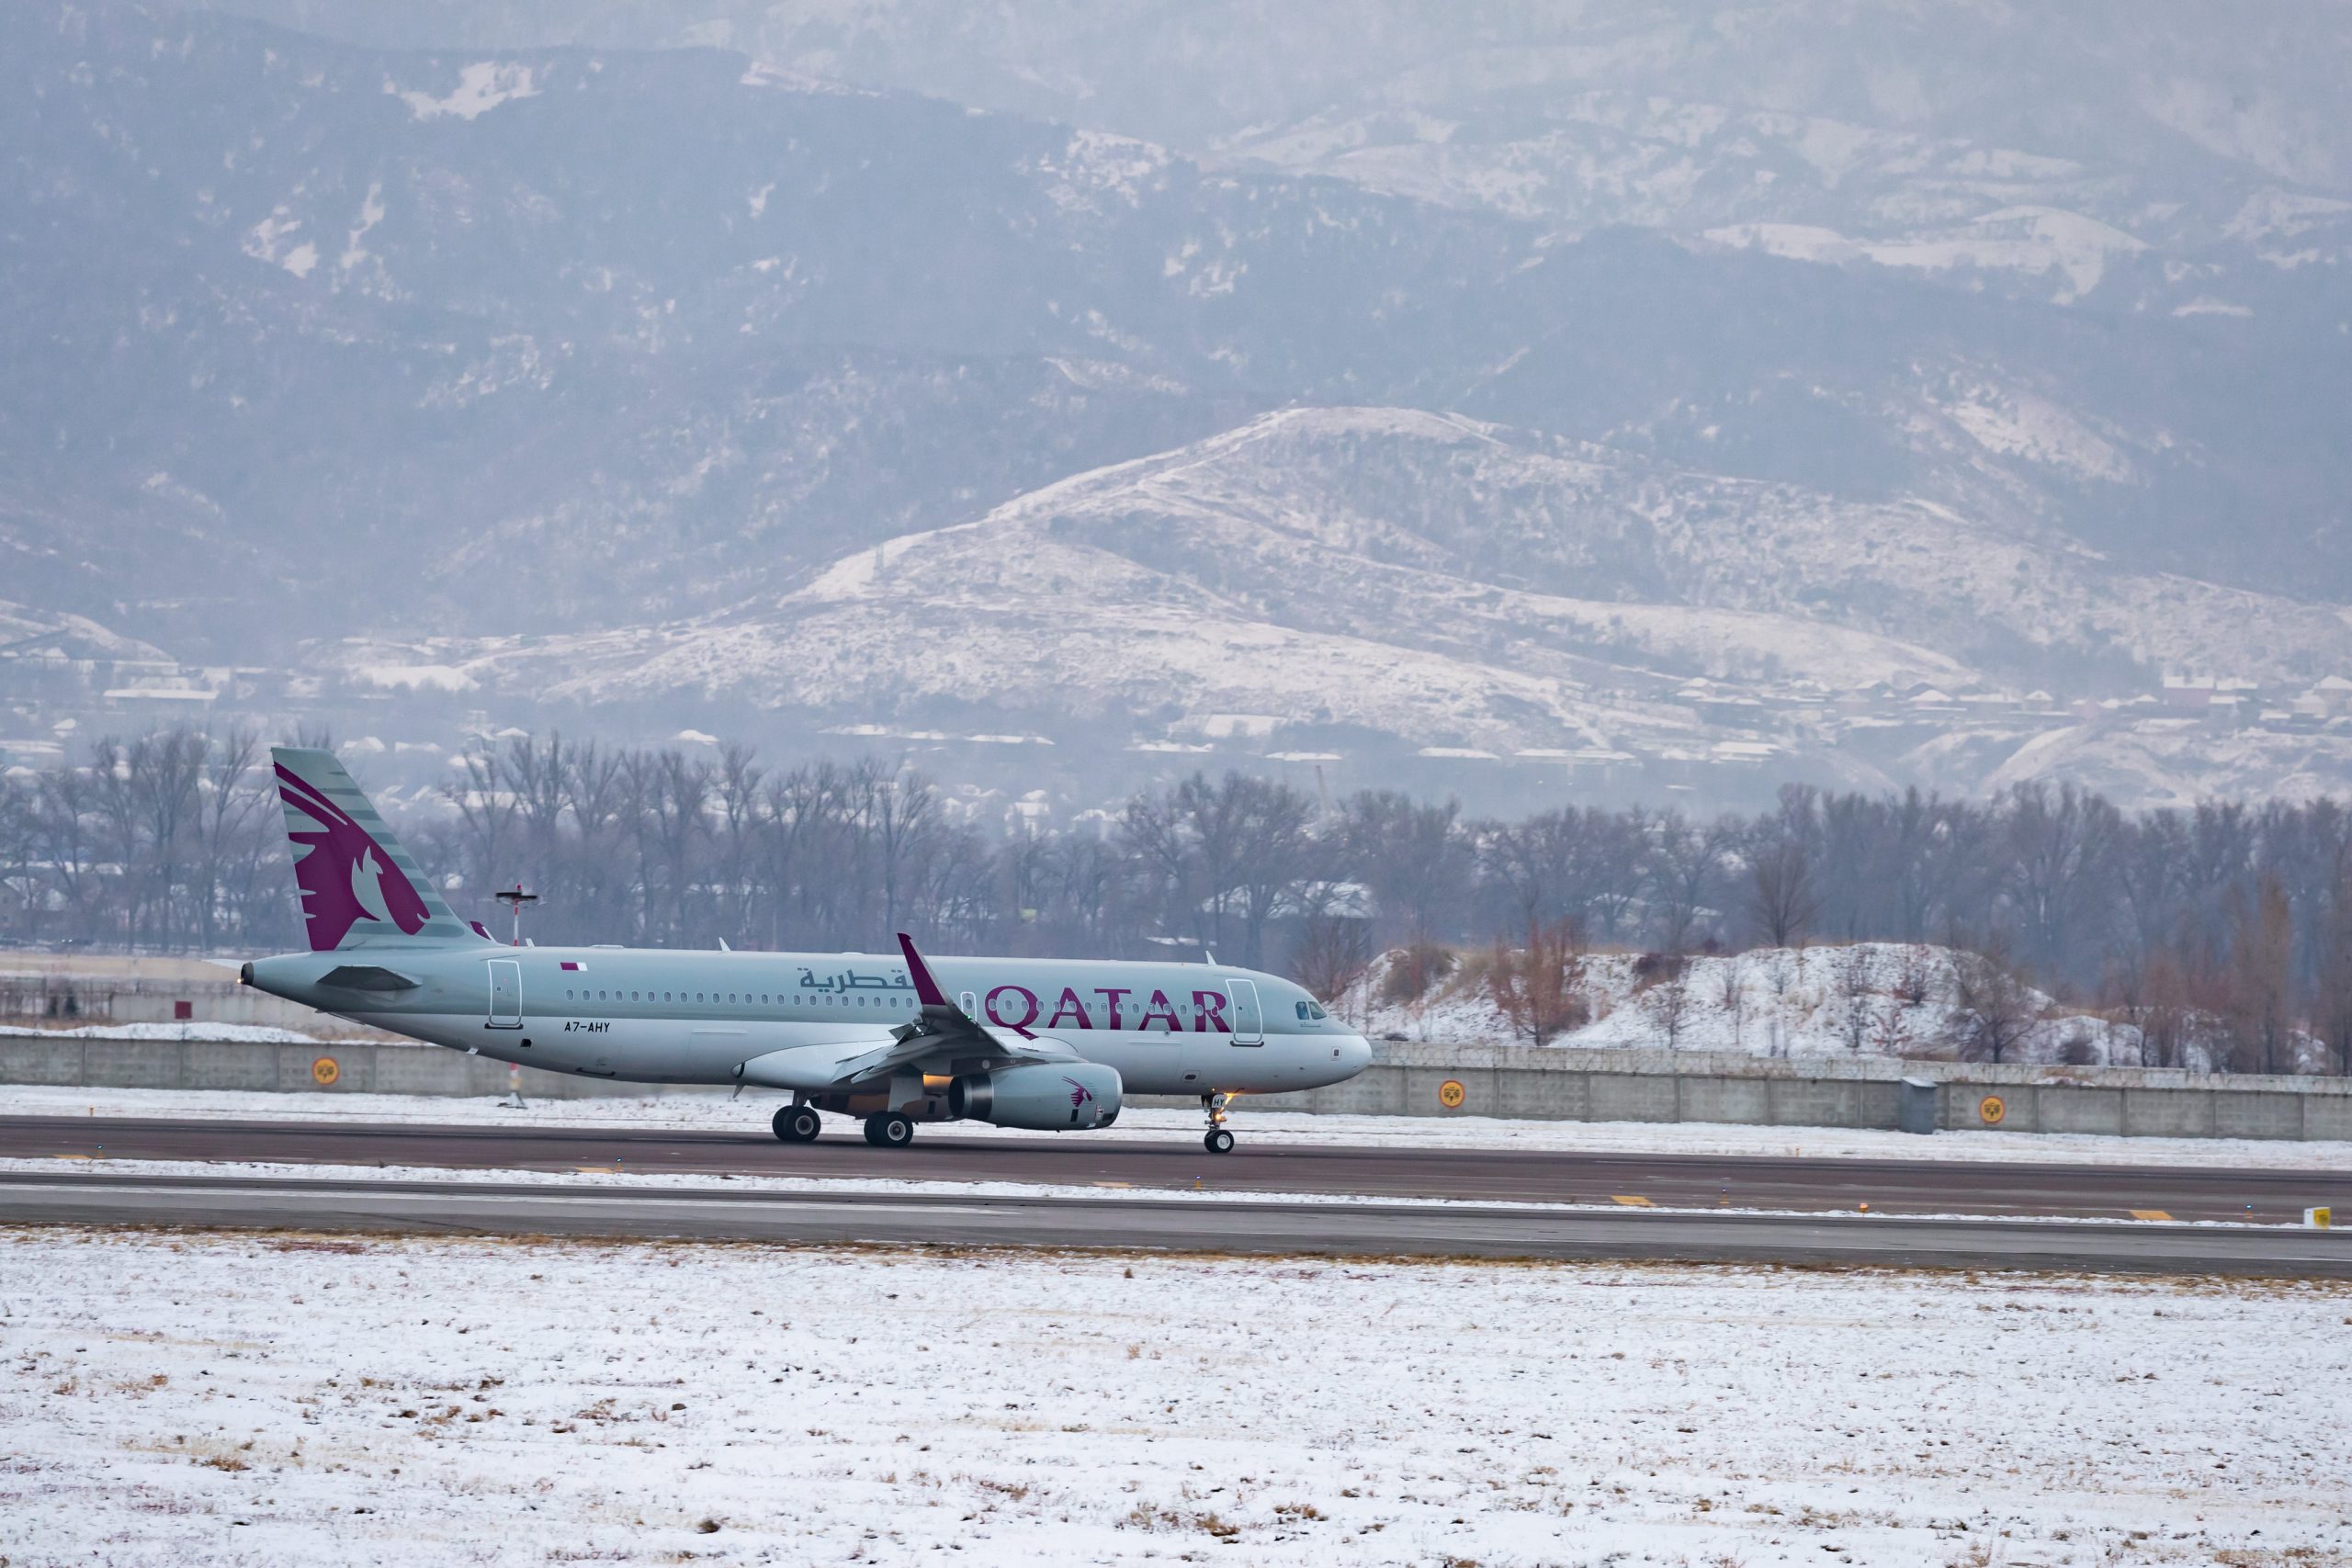 Qatar Airways Touches Down in Almaty For The First Time